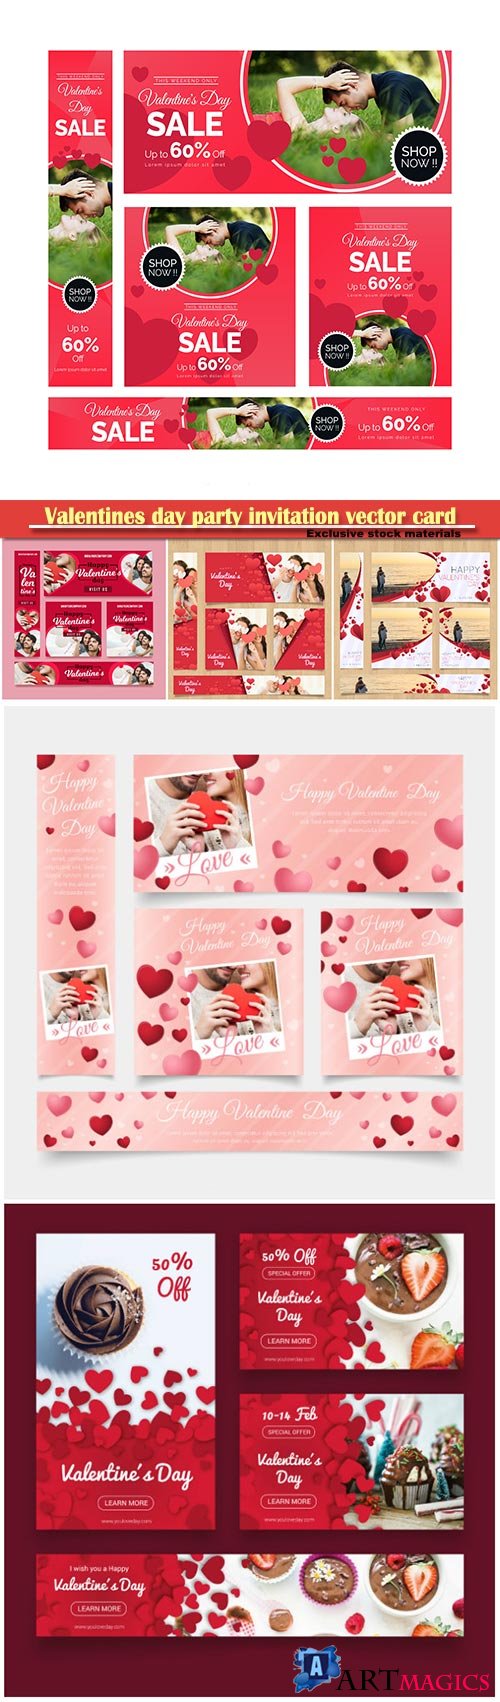 Valentines day party invitation vector card # 55